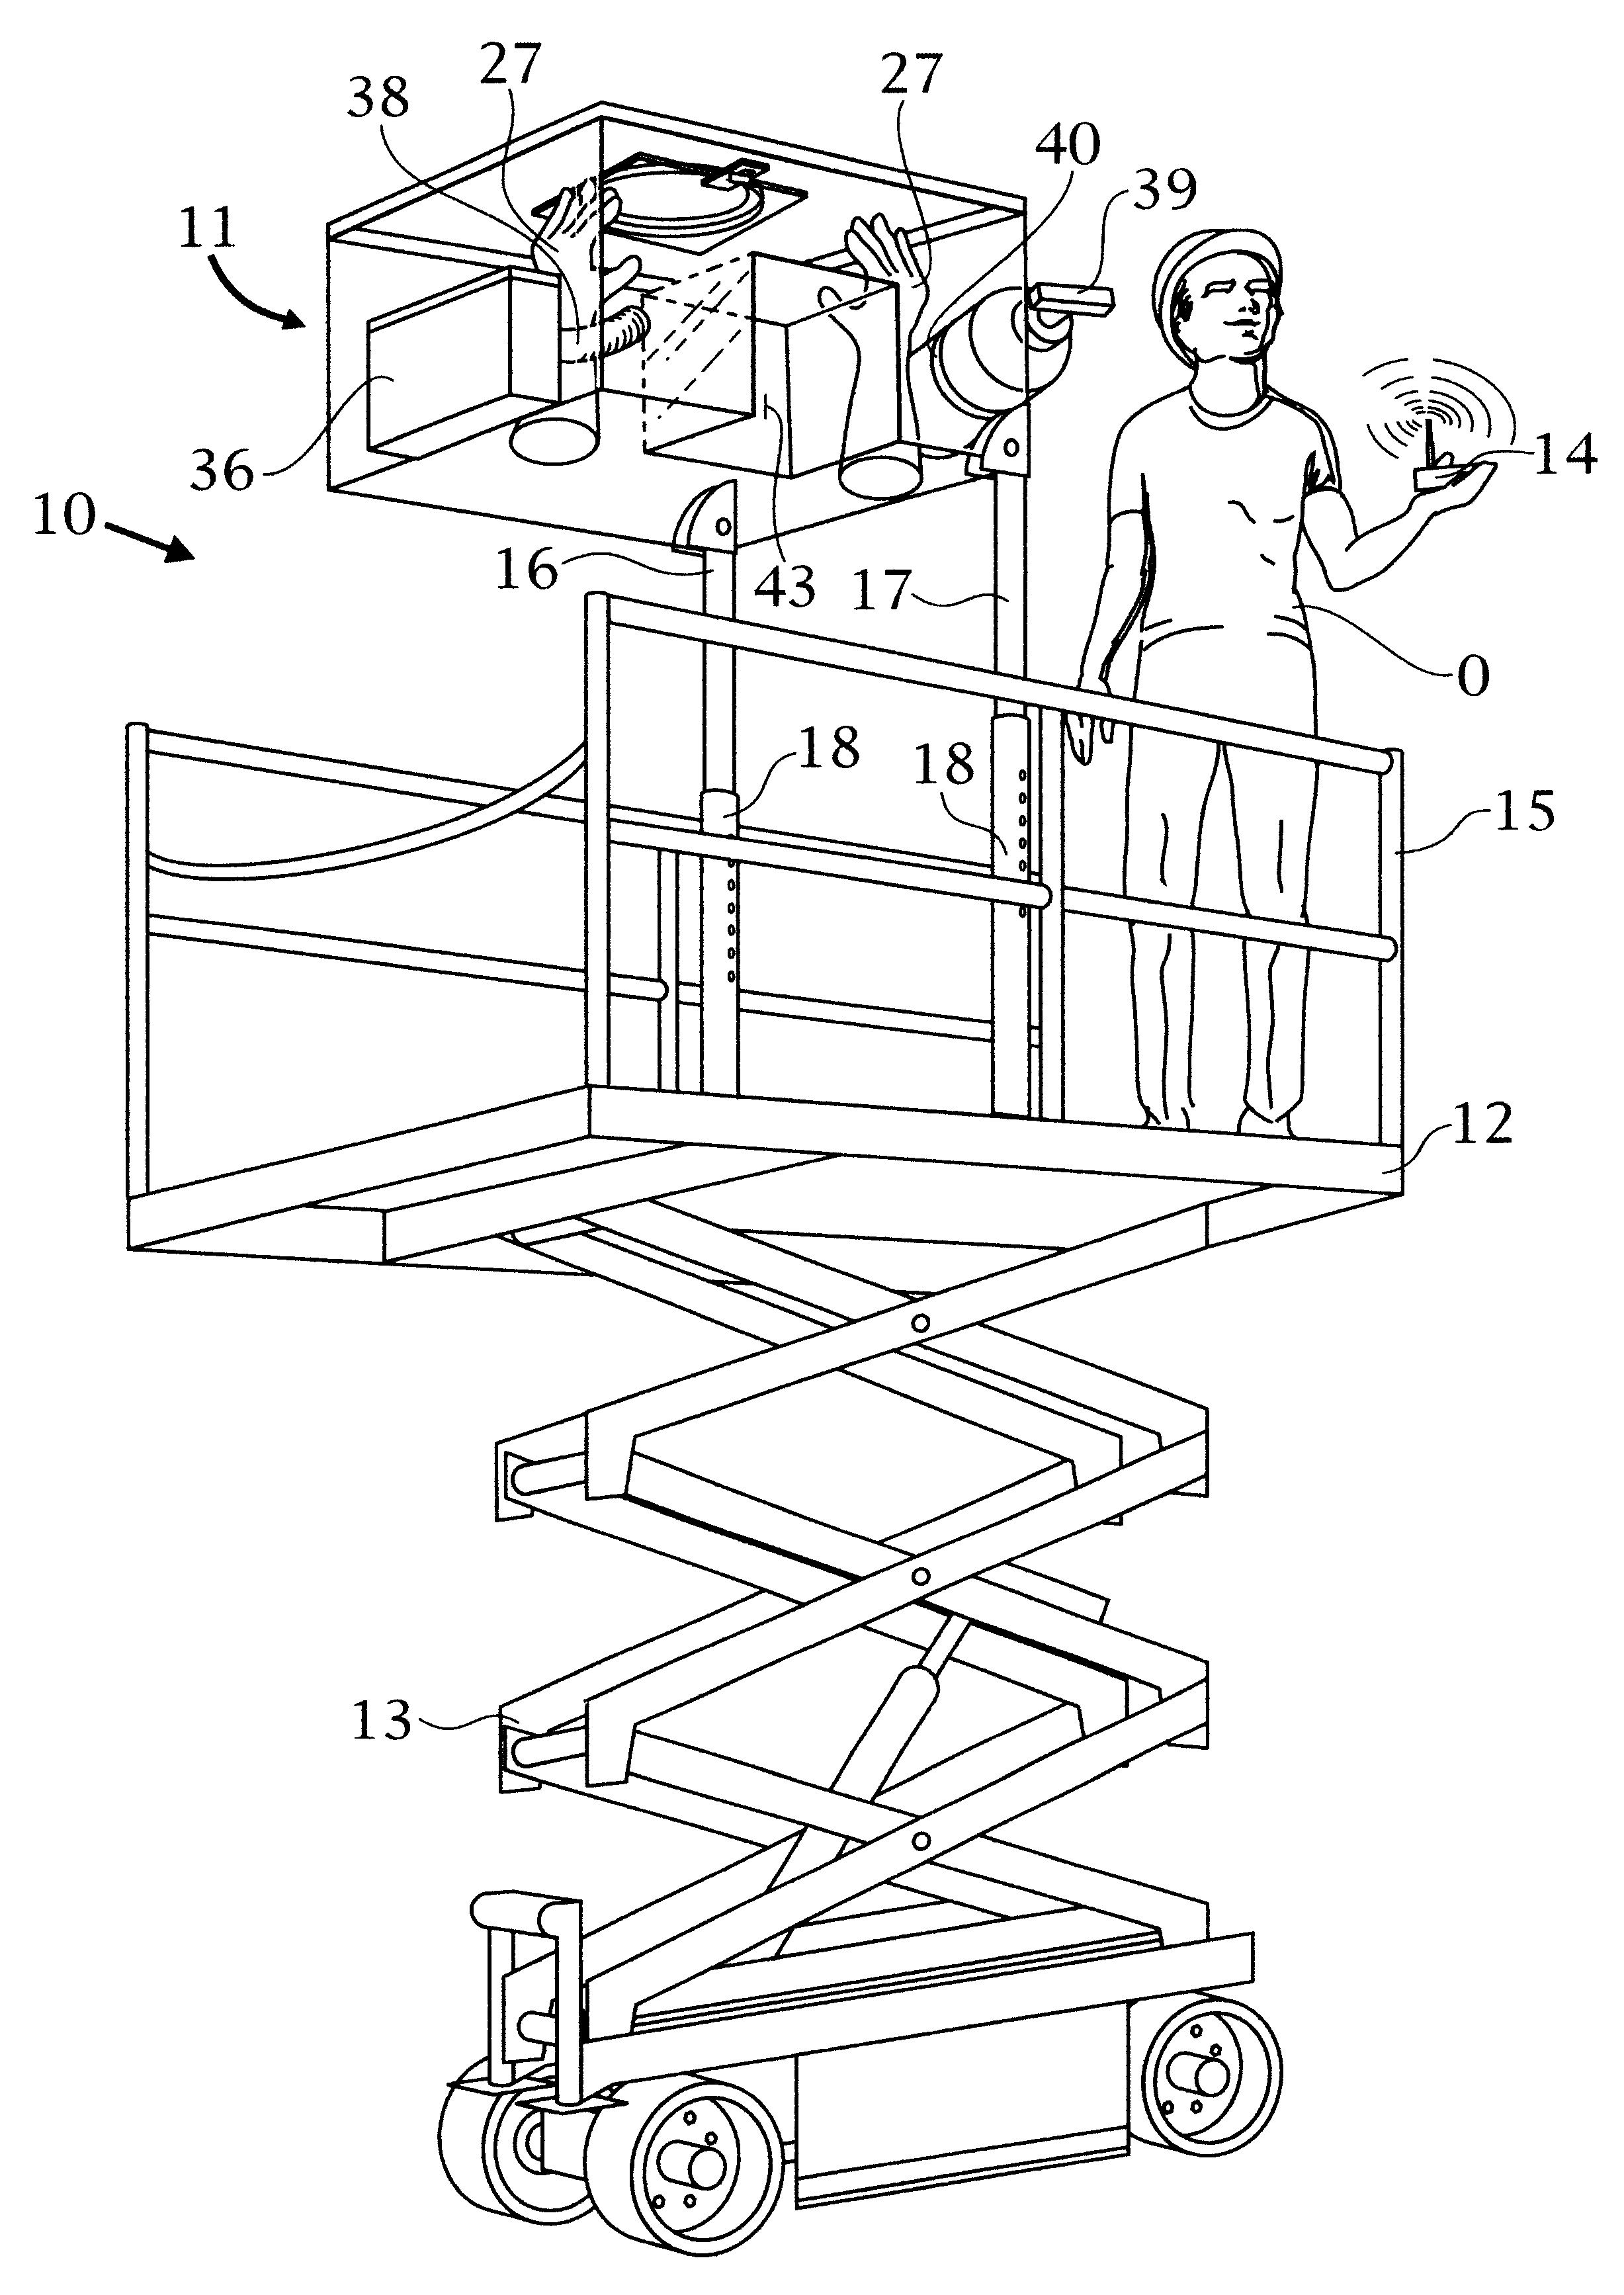 Pollution containment apparatus for making a penetration in a ceiling or wall of a building or other structure